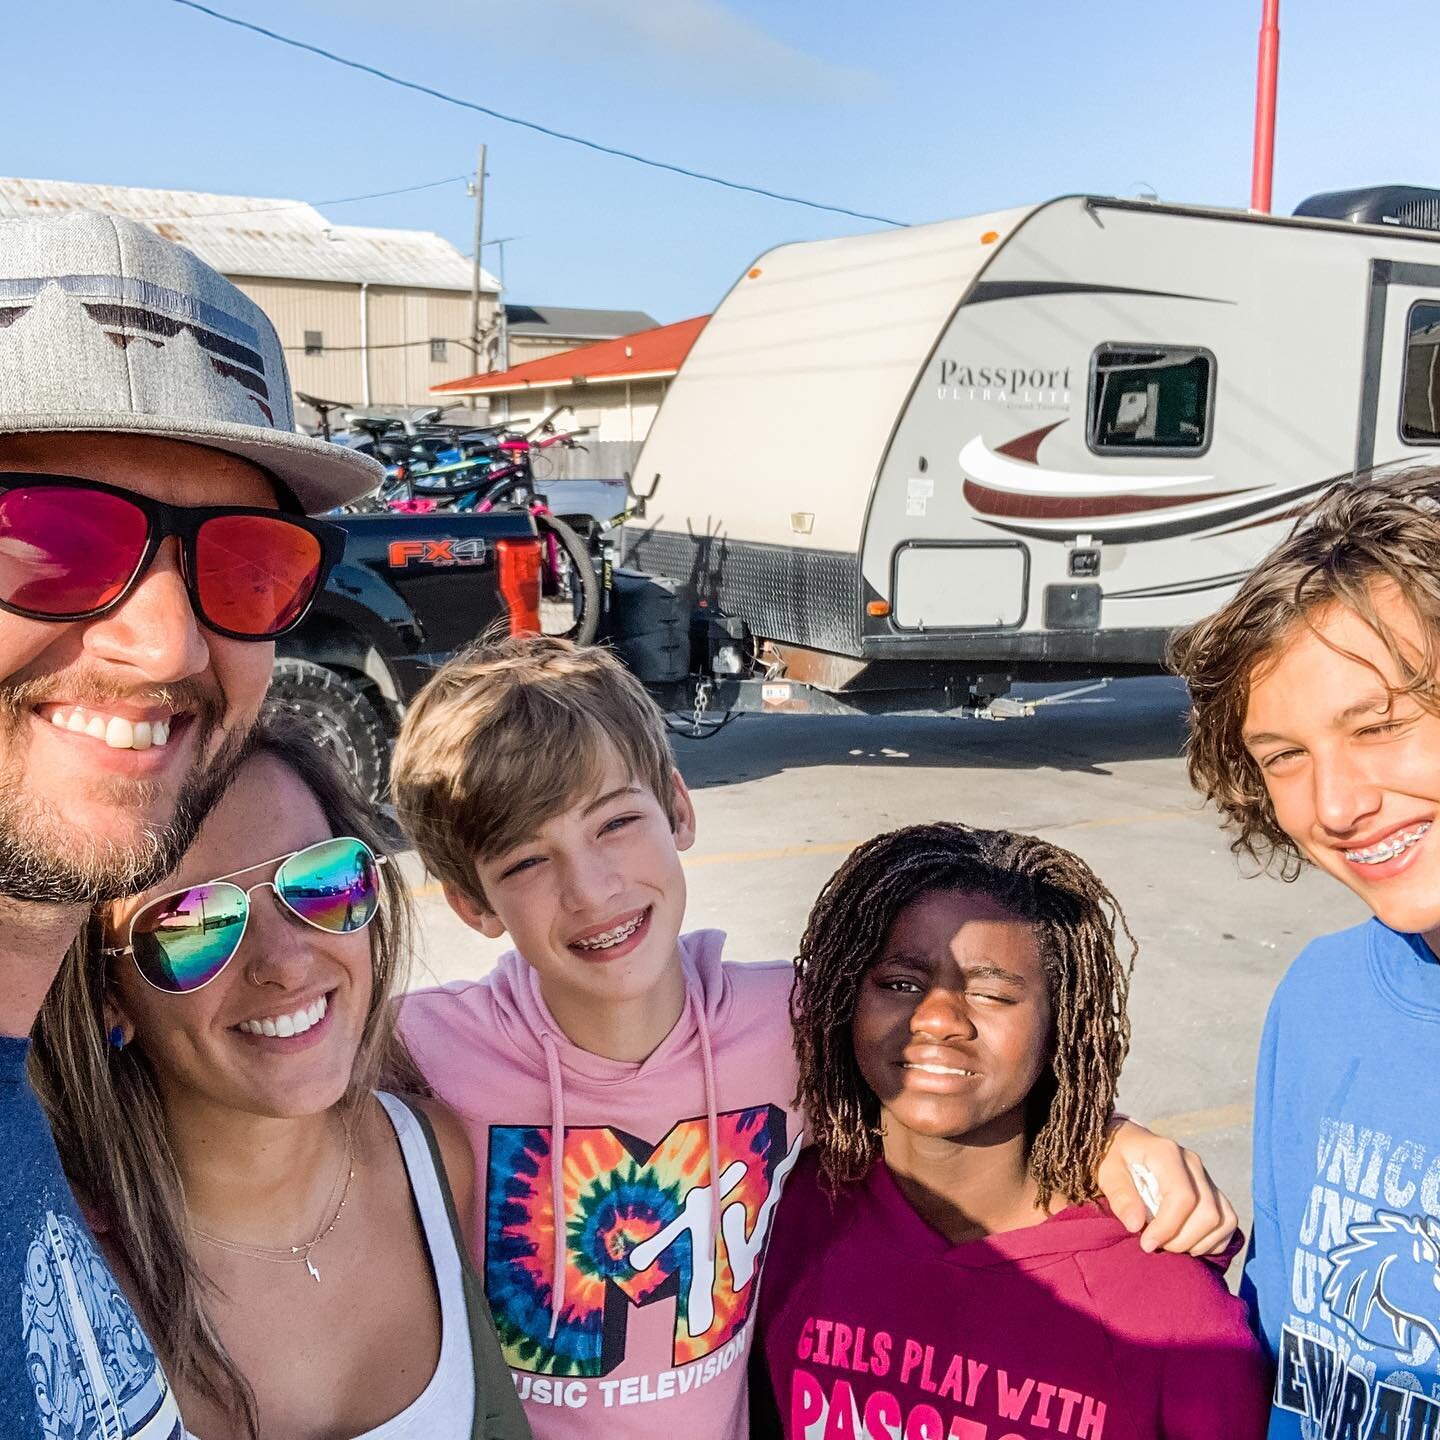 And we are off! Off on an adventure with our trusty camper, Big Poppa!

We are headed to the mountains to play, bike, hike and snack!
I asked y&rsquo;all earlier last week for some recommendations and you SHOWED up! Thank you!!

I need to know&hellip